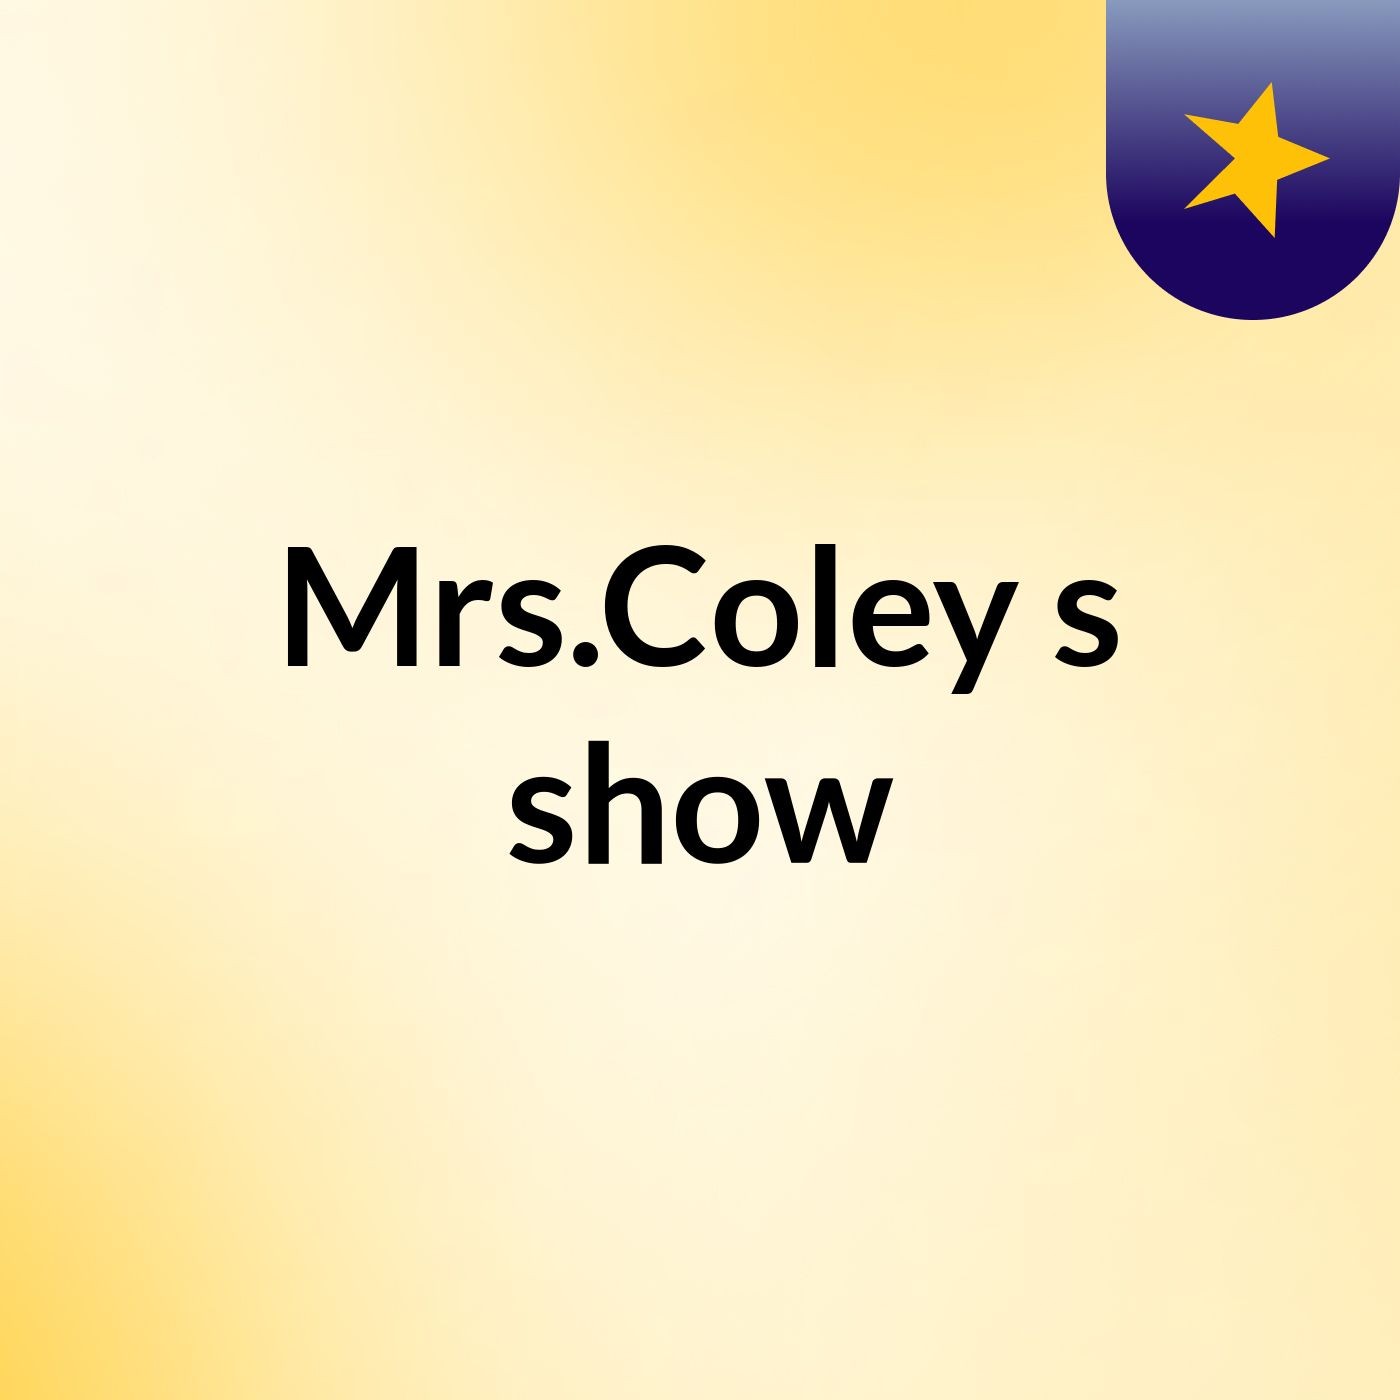 Mrs.Coley's show